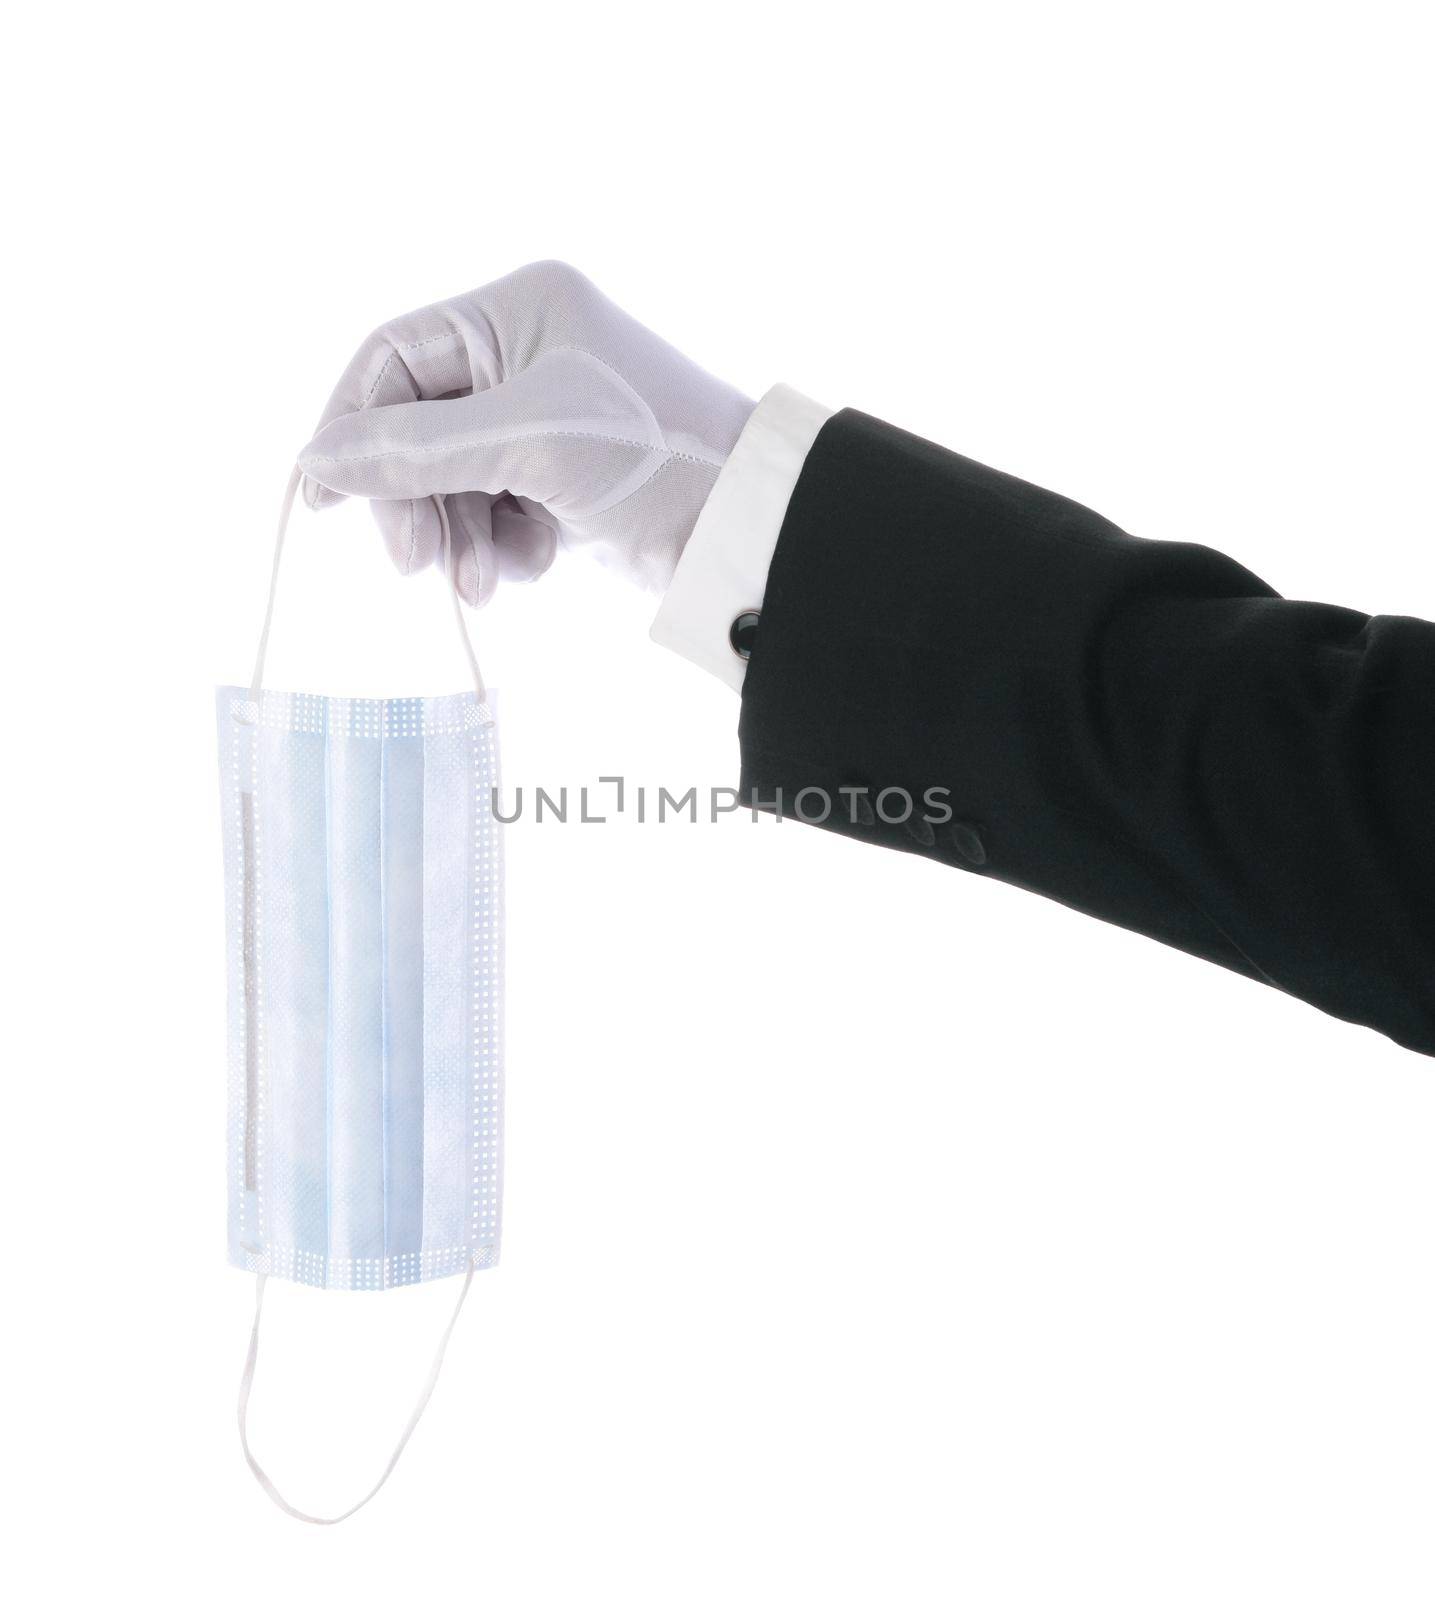 A  Tuxedo sleeve with a White Gloved hand holding a COVID-19 surgical mask over a white background.